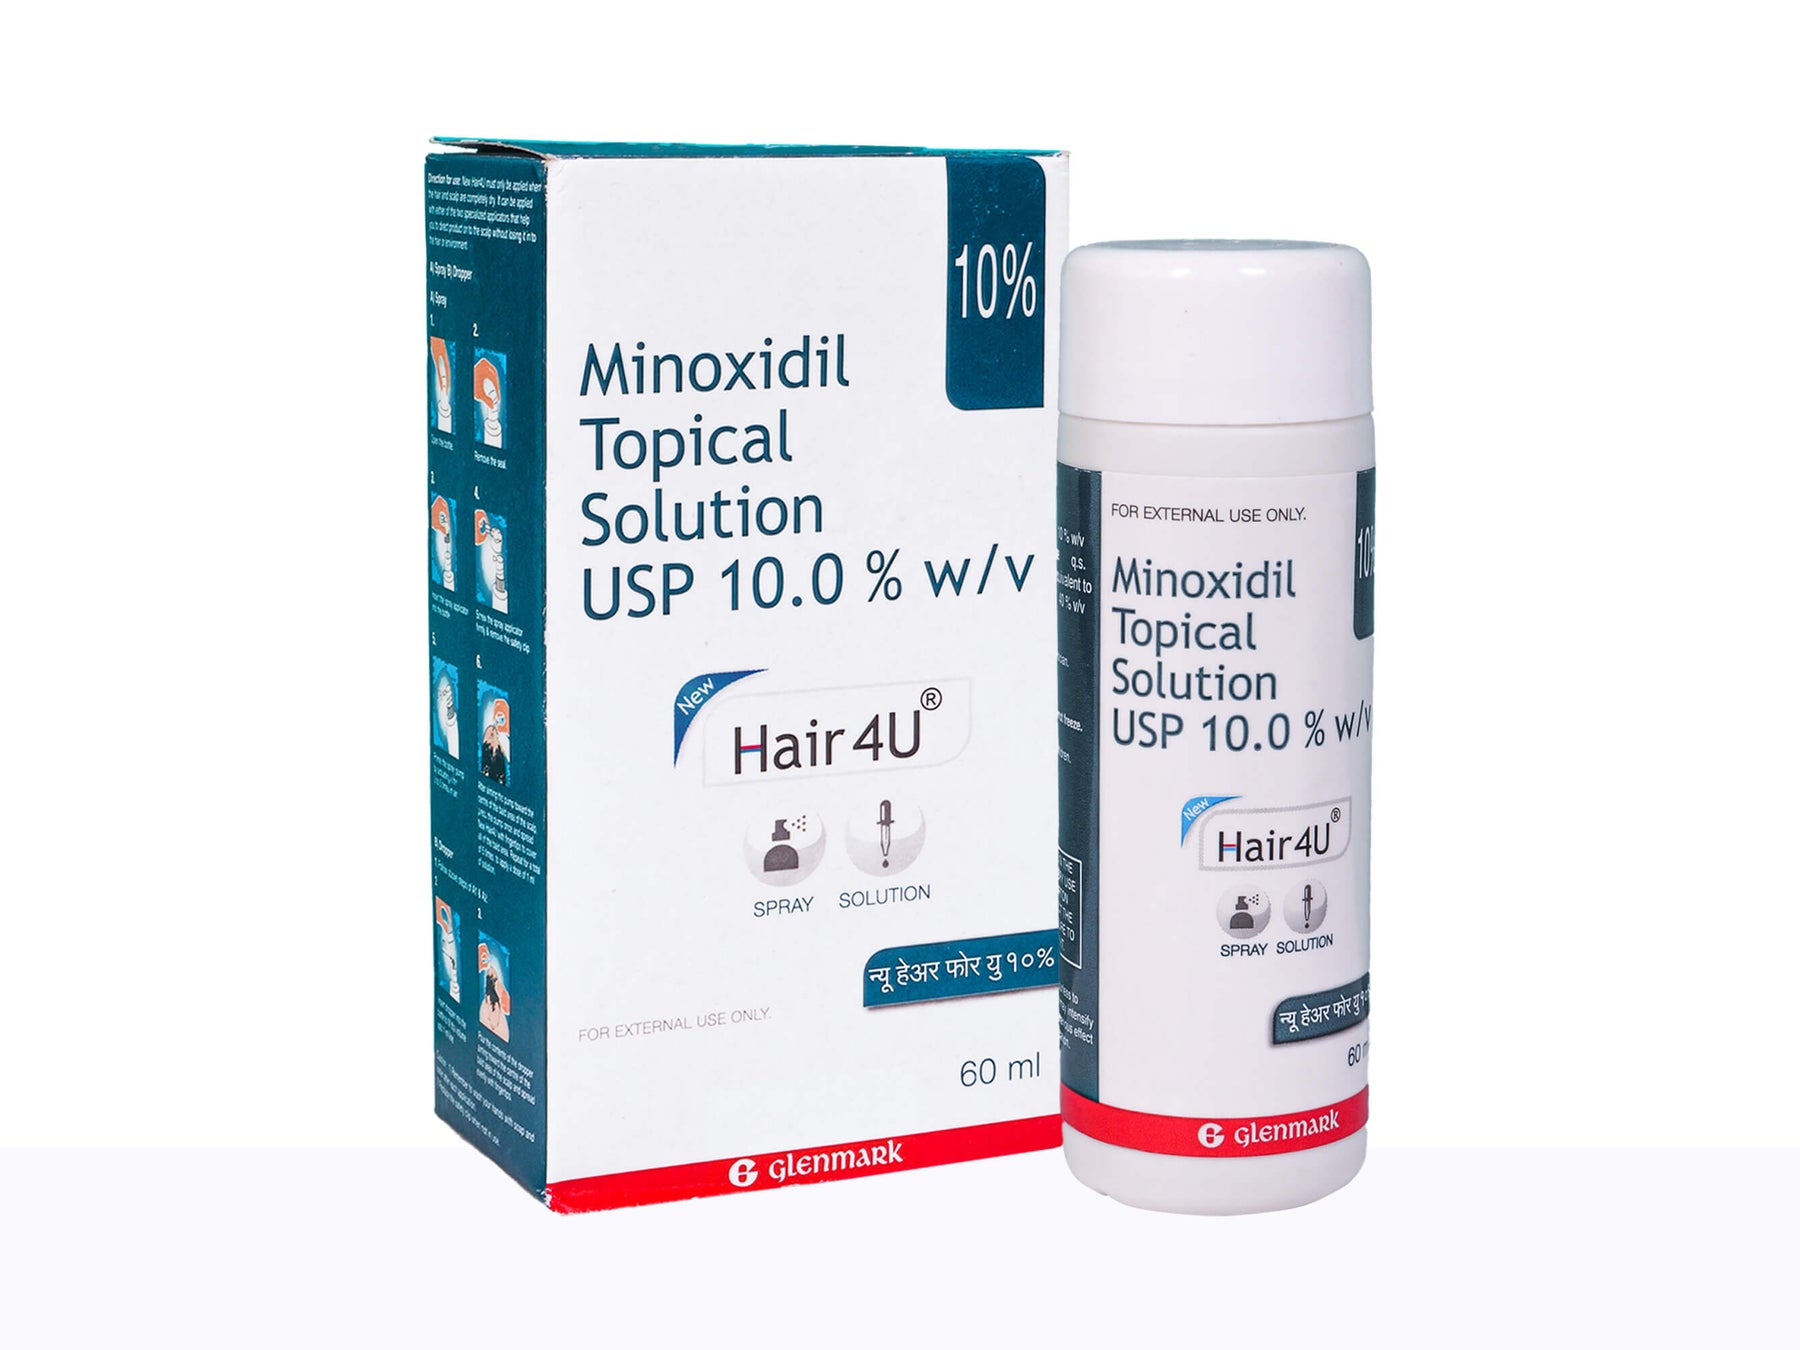 Hair 4U Minoxidil Topical Solution USP 20  60ml  5ML  We care for your  Health  Beauty